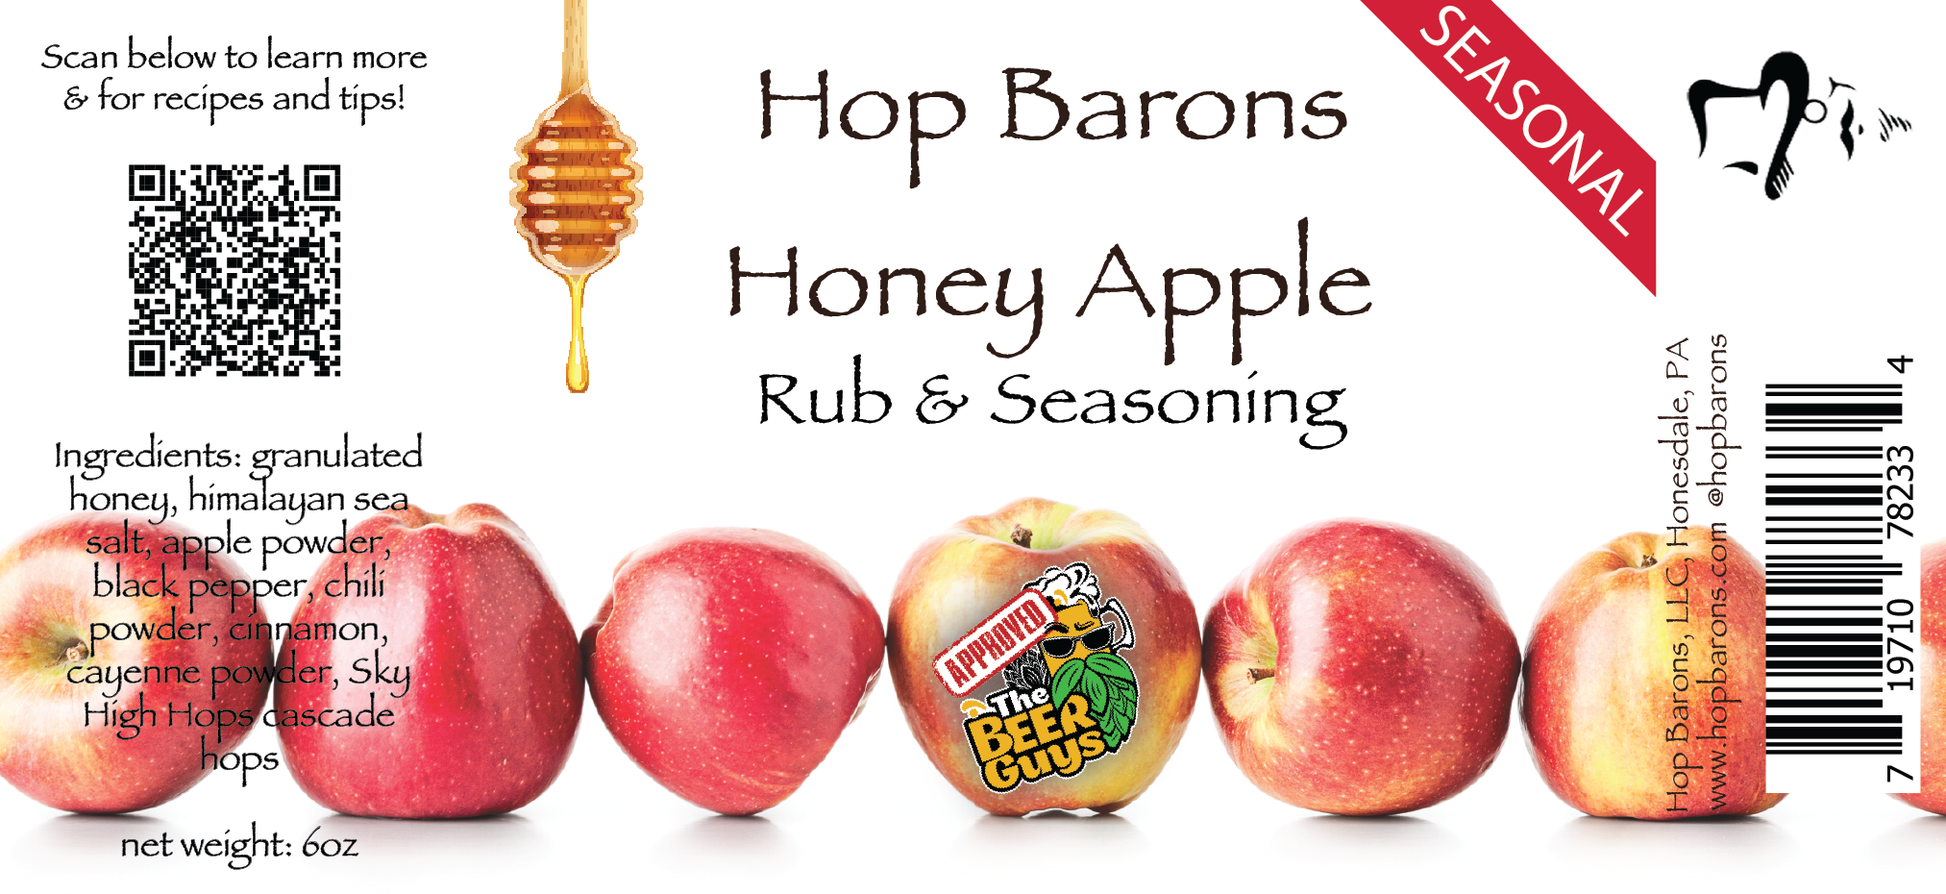 Honey Apple Seasoning: Fall Flavors at Their Finest! | Hop Barons